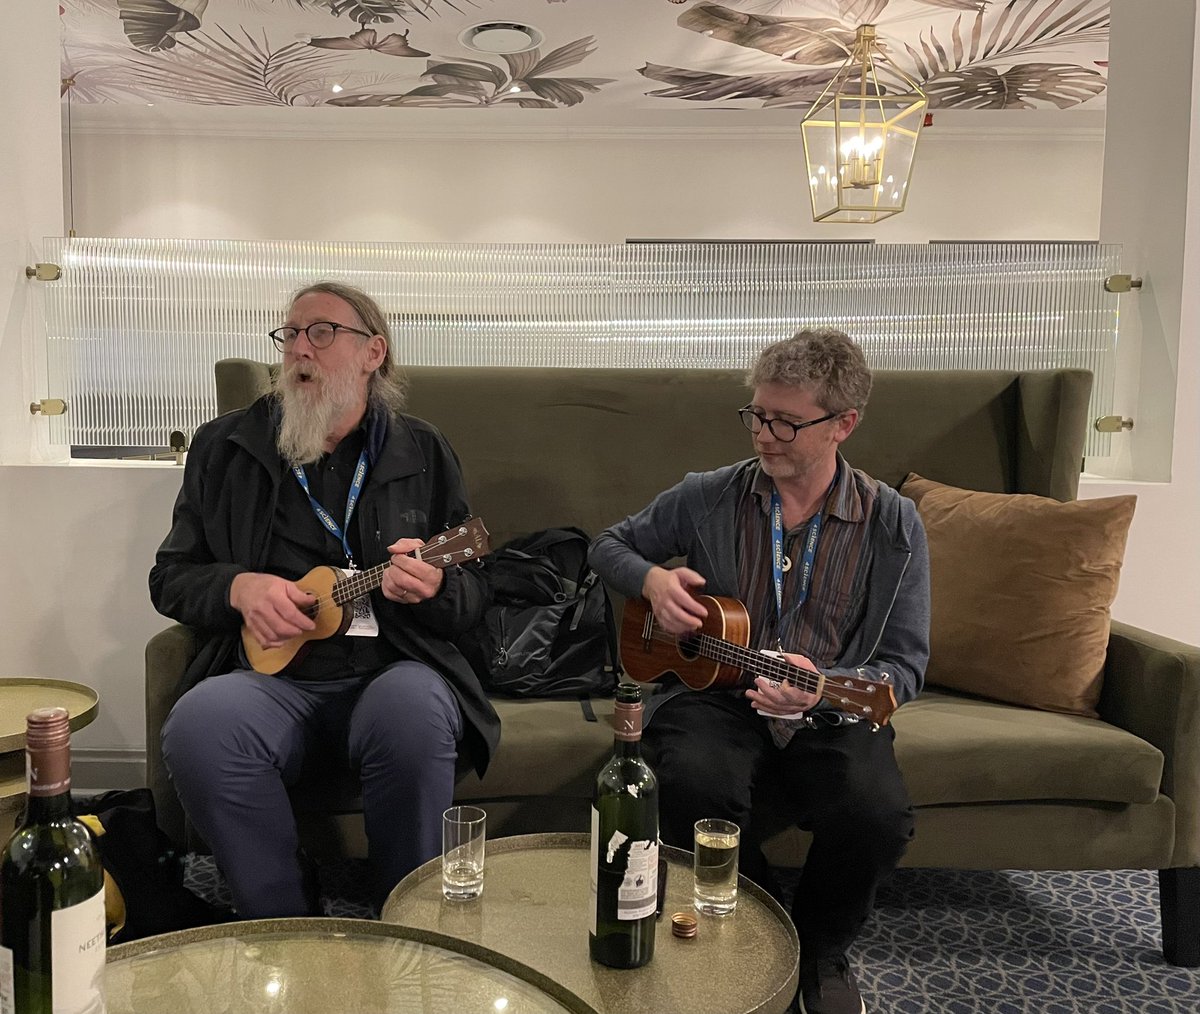 @cgknowles @ptsefton @pedroprincipe Our Open Repositories troubadours with a medley of Beatles and Dylan songs #openrepos2023